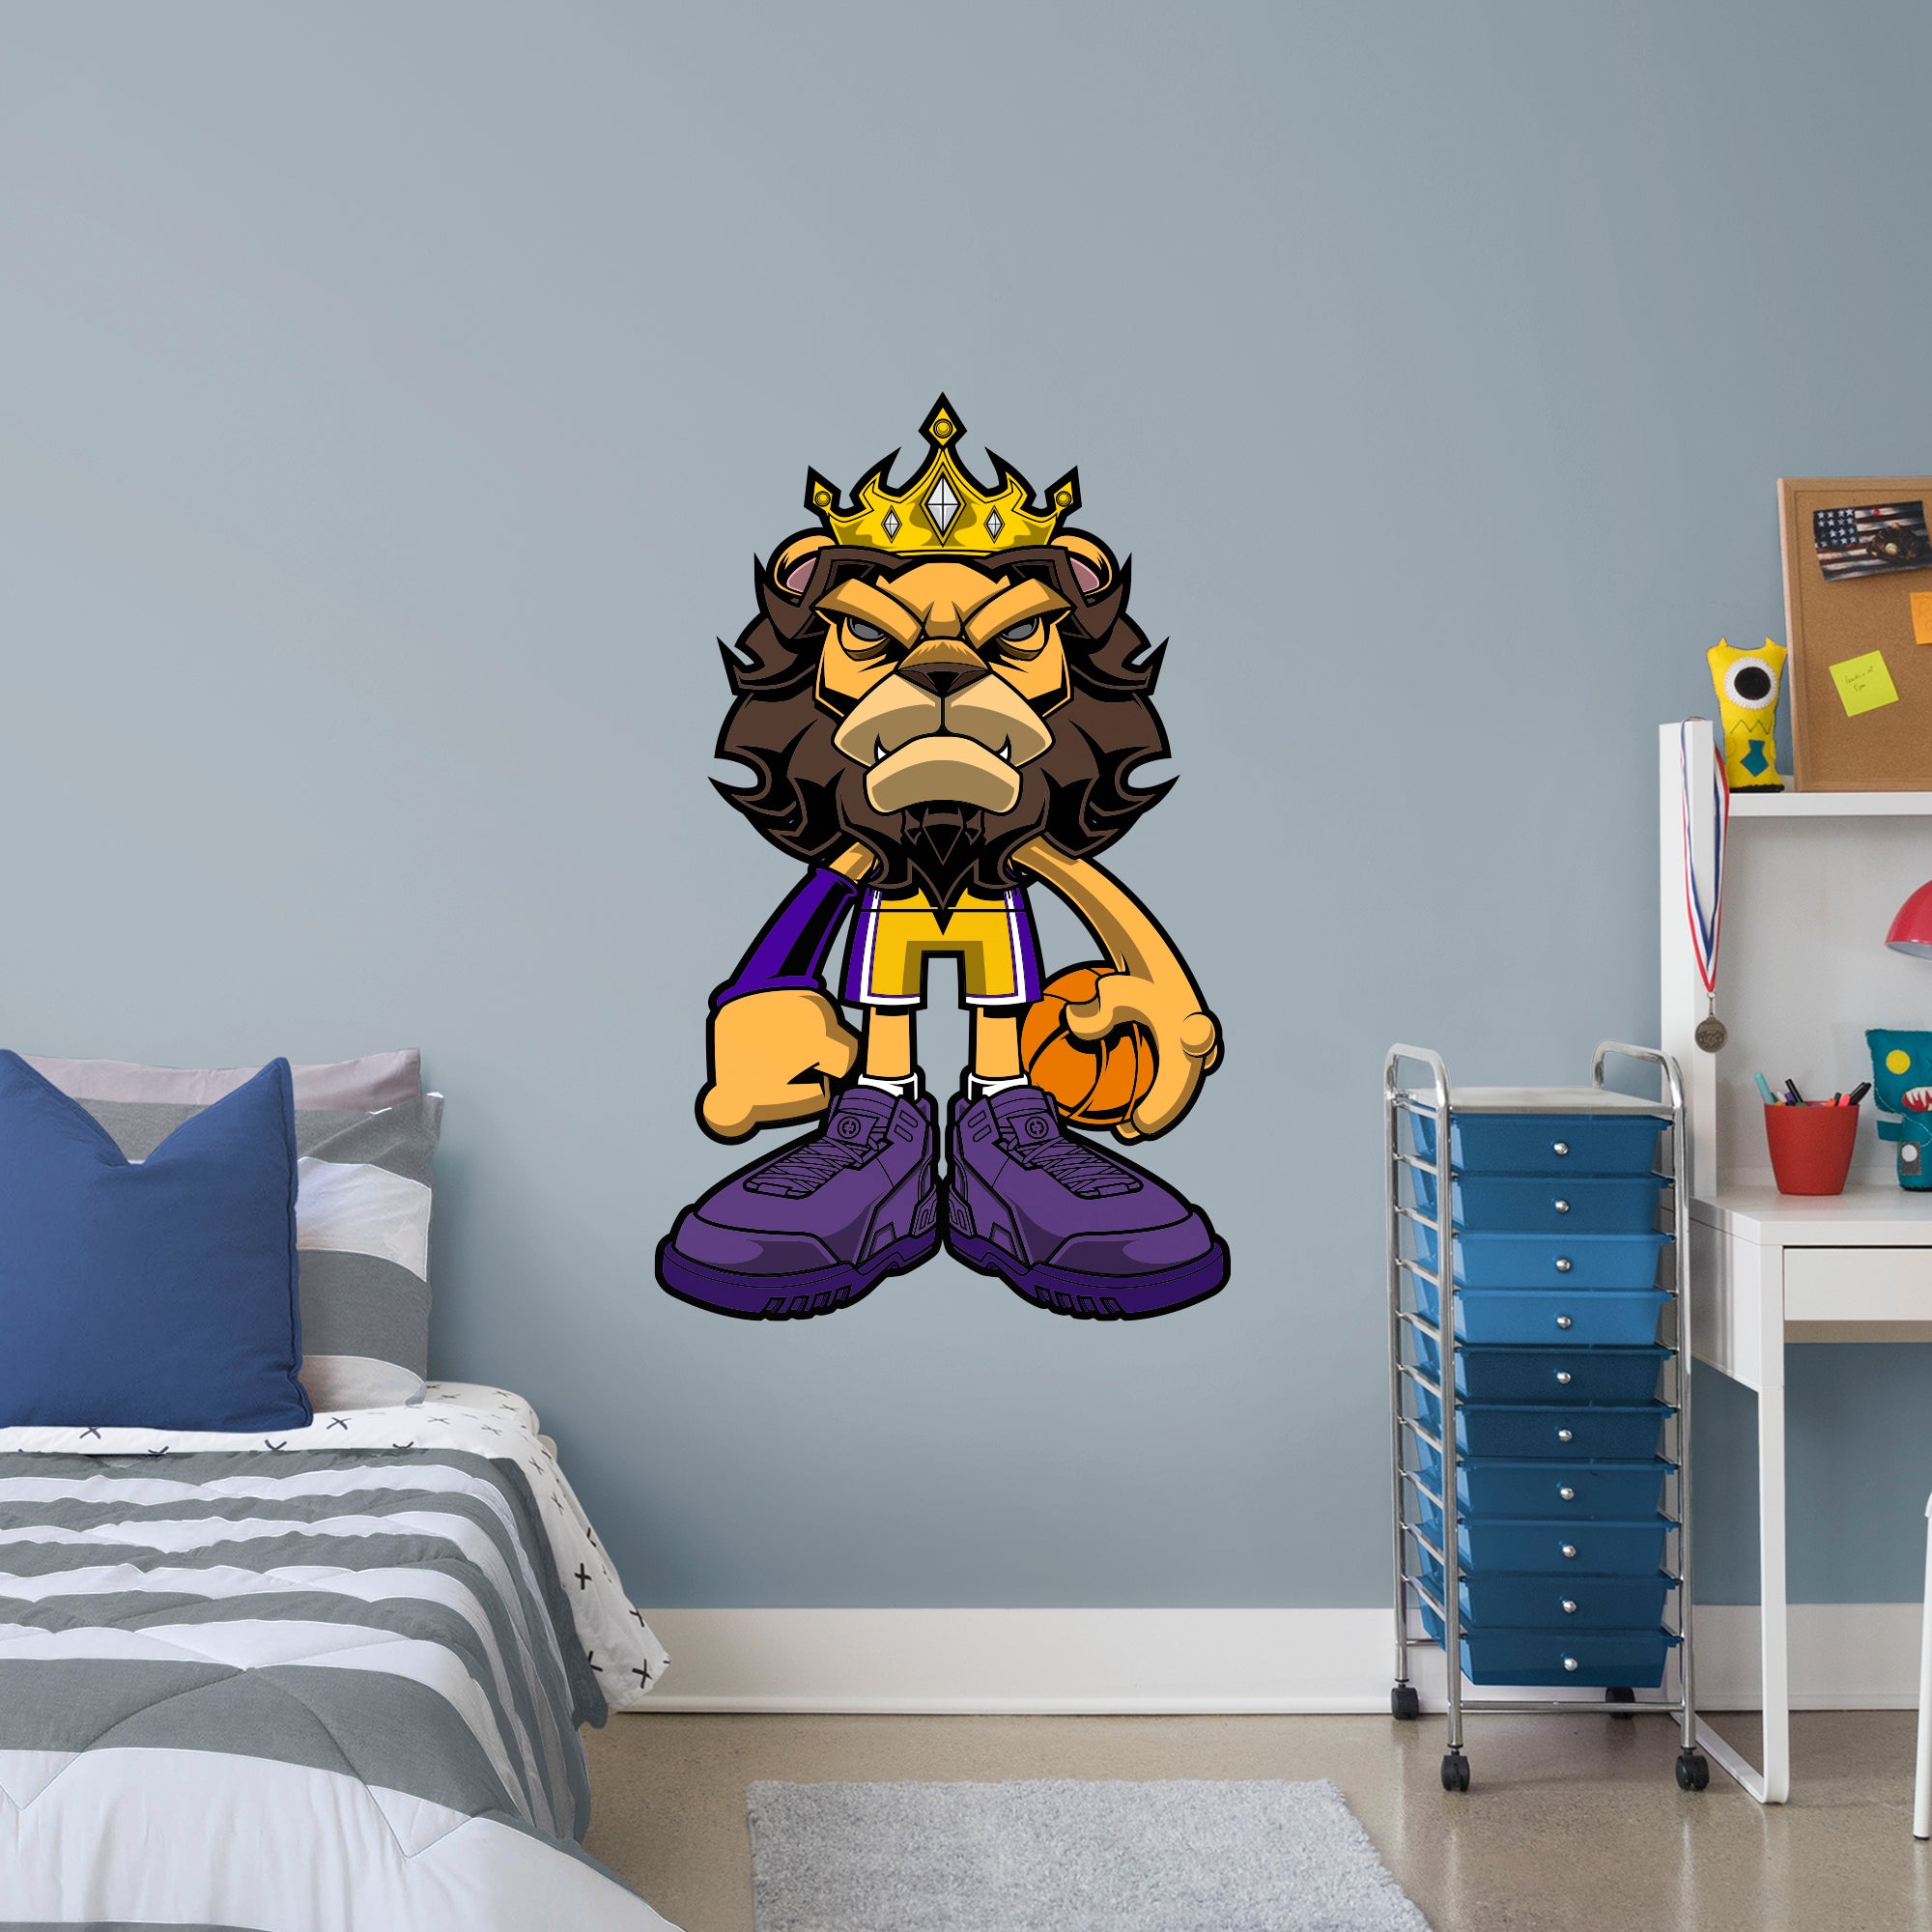 Top 3 - The King: Tracy Tubera - Removable Vinyl Wall Decal Giant Decal by Fathead